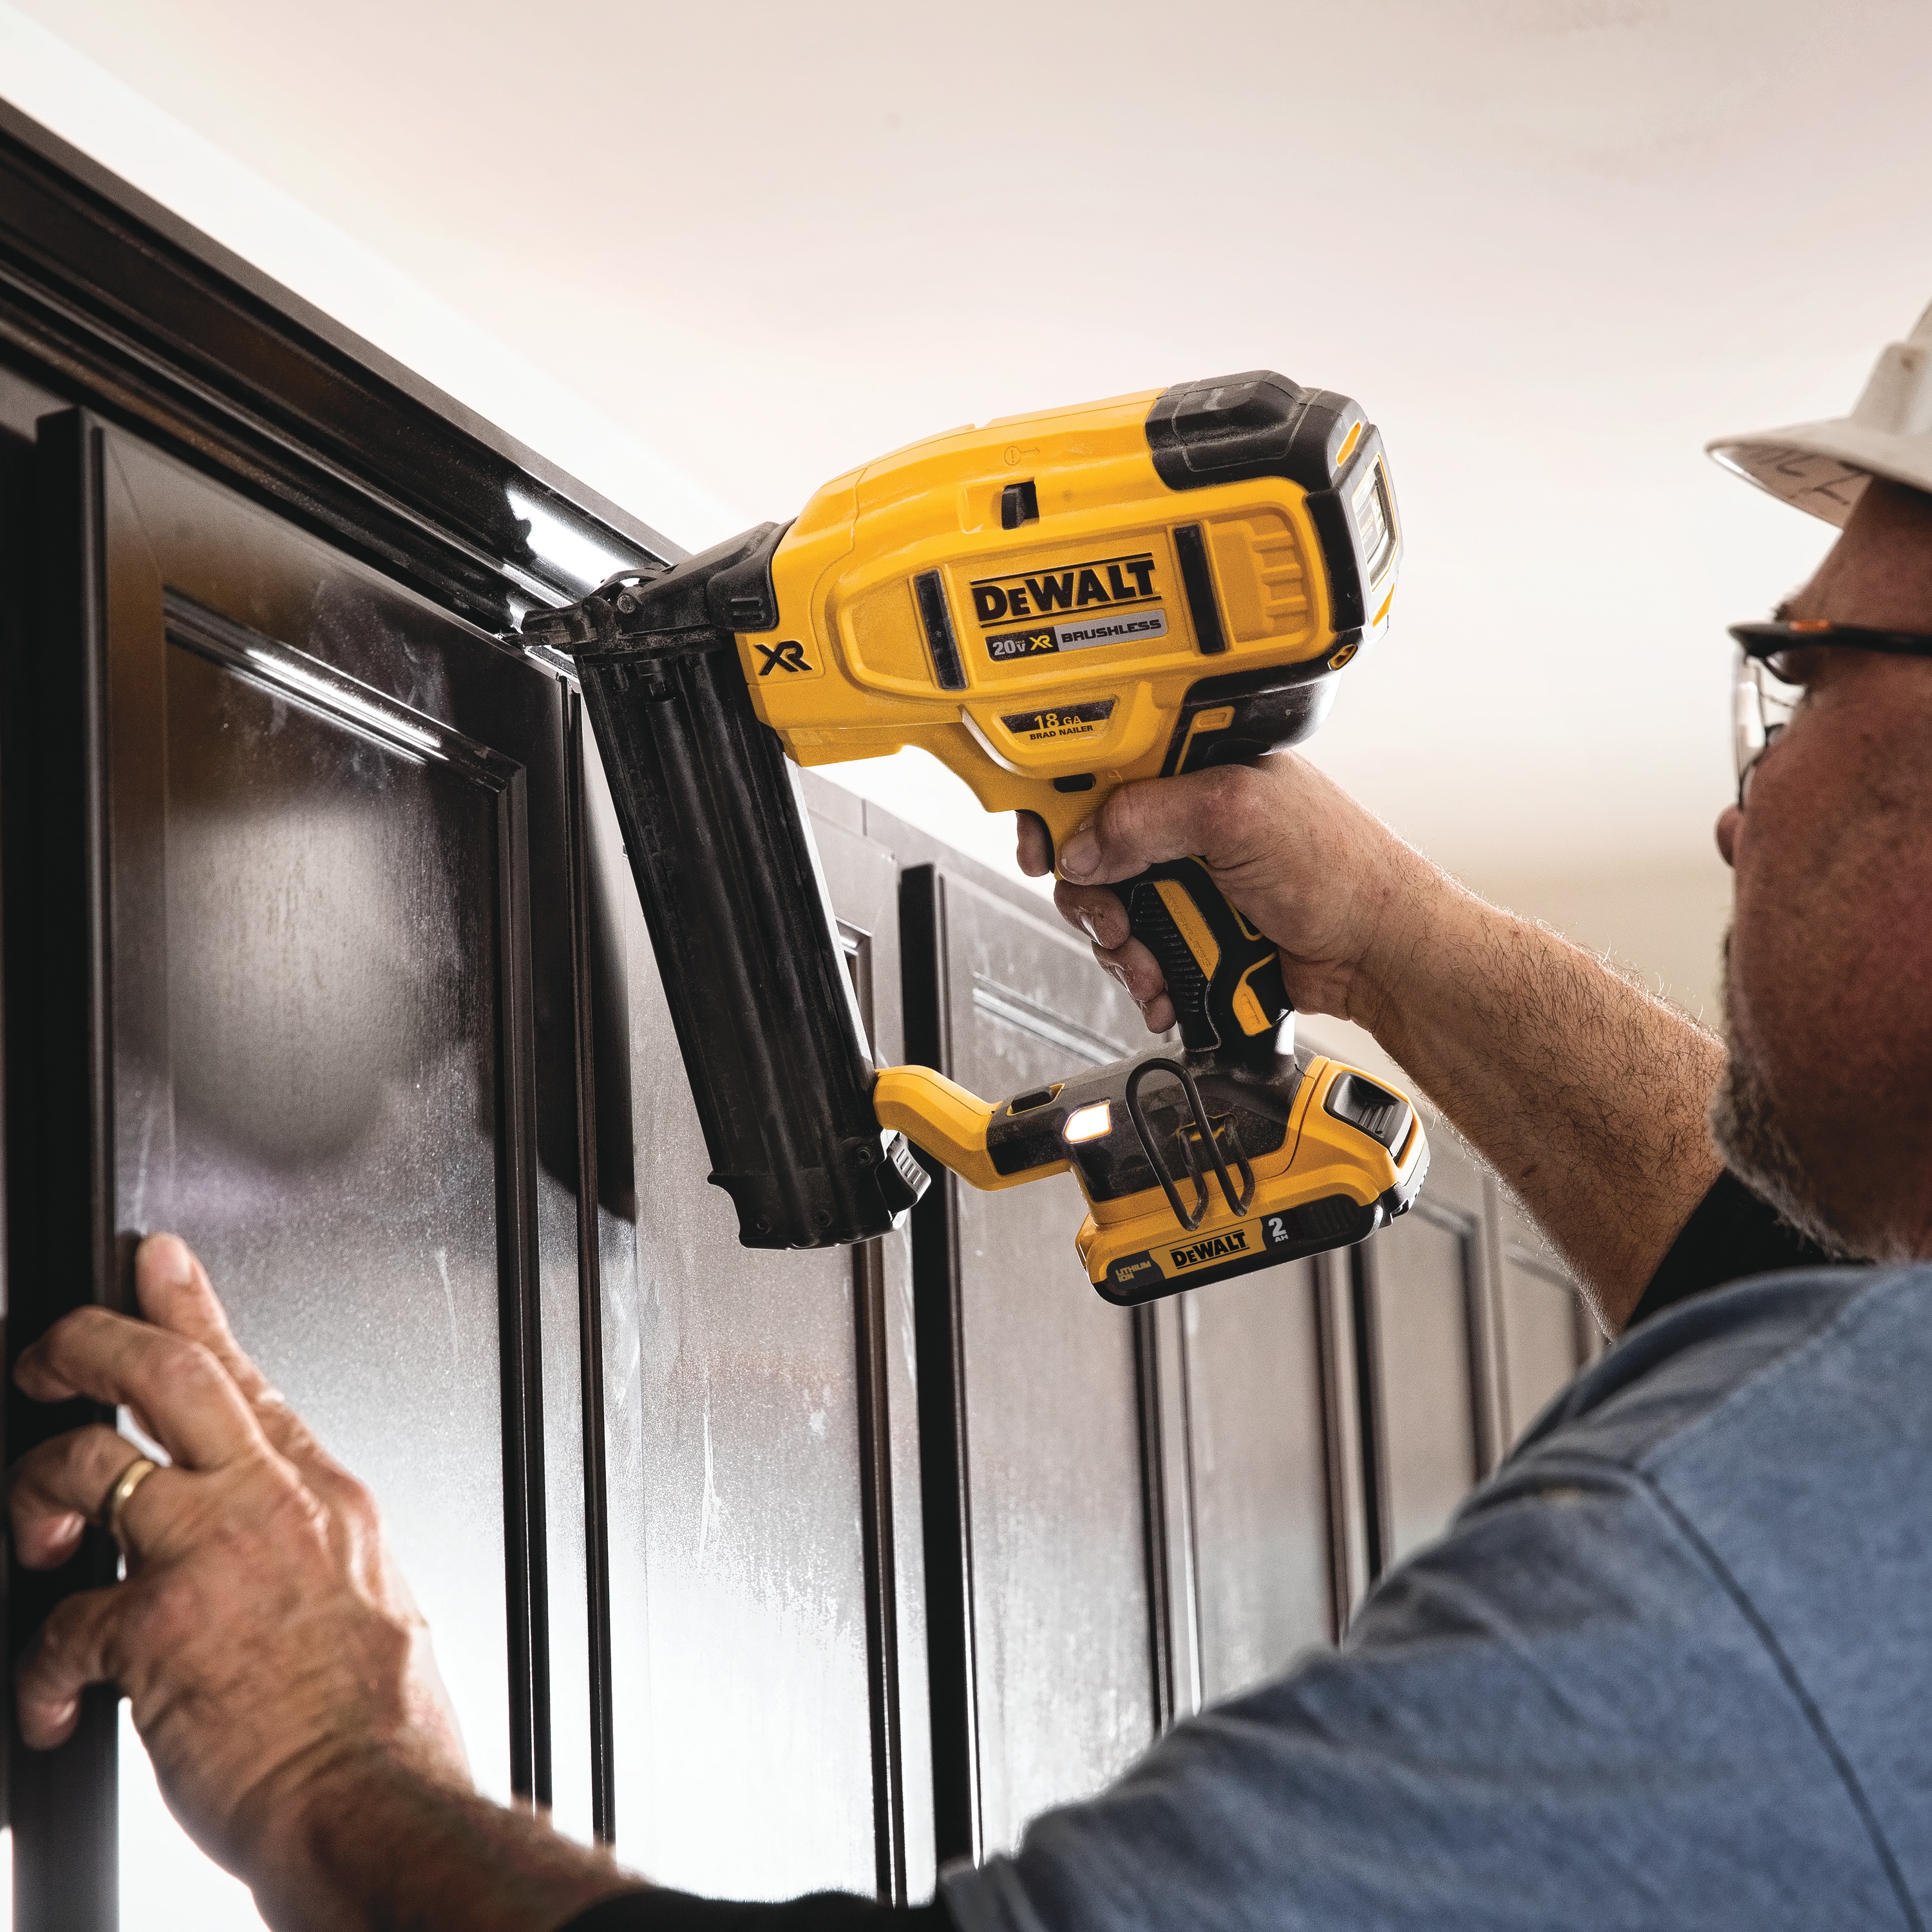 XR 18 gauge Cordless Brad Nailer in action on wooden panel by a construction worker